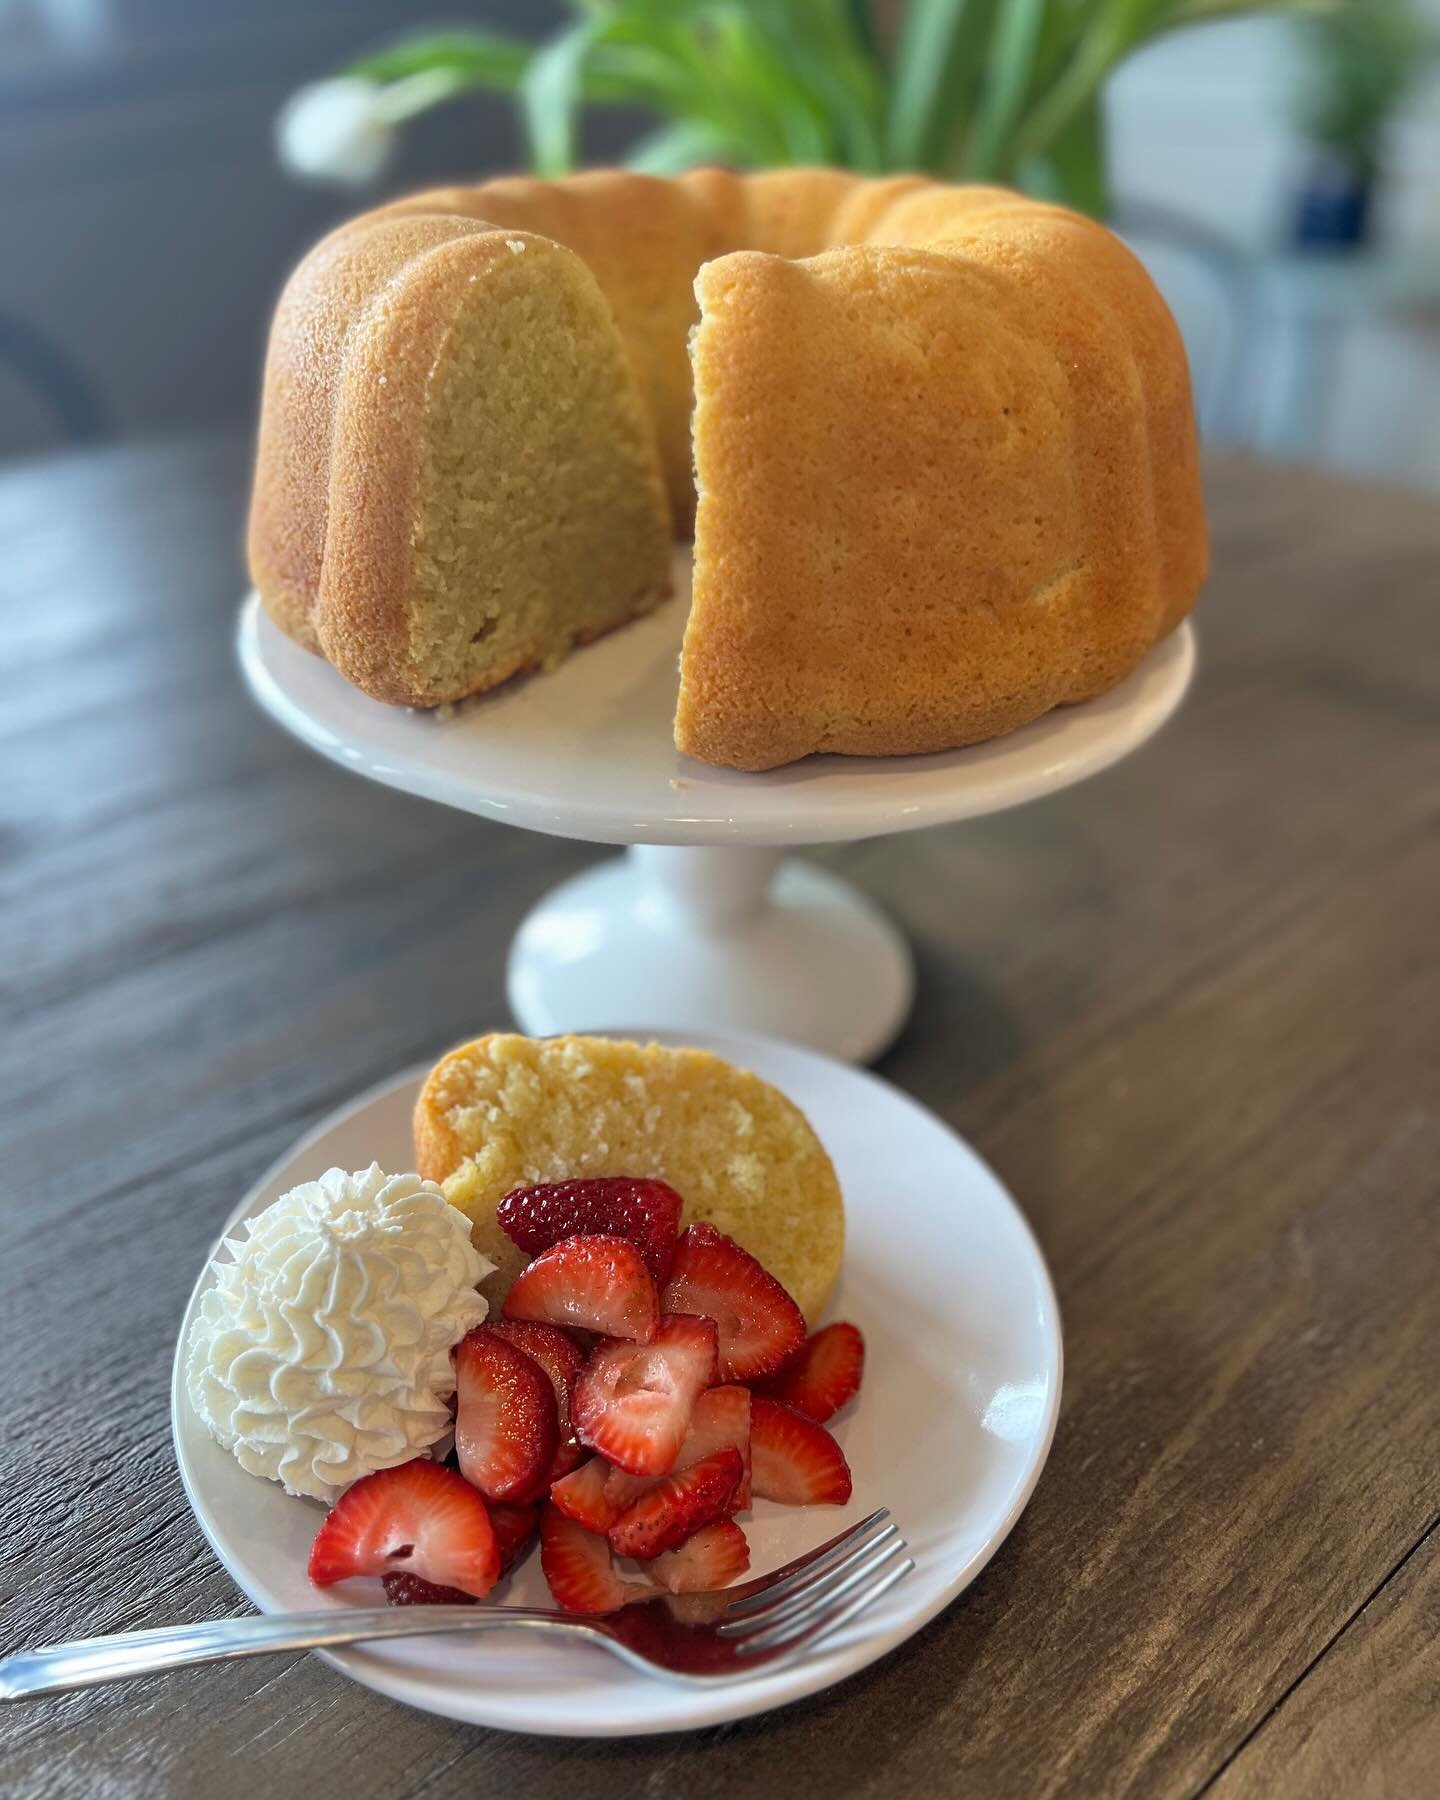 🌹Perfectly plain pound cake served with a side of sweetened strawberries and Marie&rsquo;s homemade whipped cream ✨ Available for Mother&rsquo;s Day preorder!
.
.
#strawberryshortcake #poundcake #strawberries #mothersday